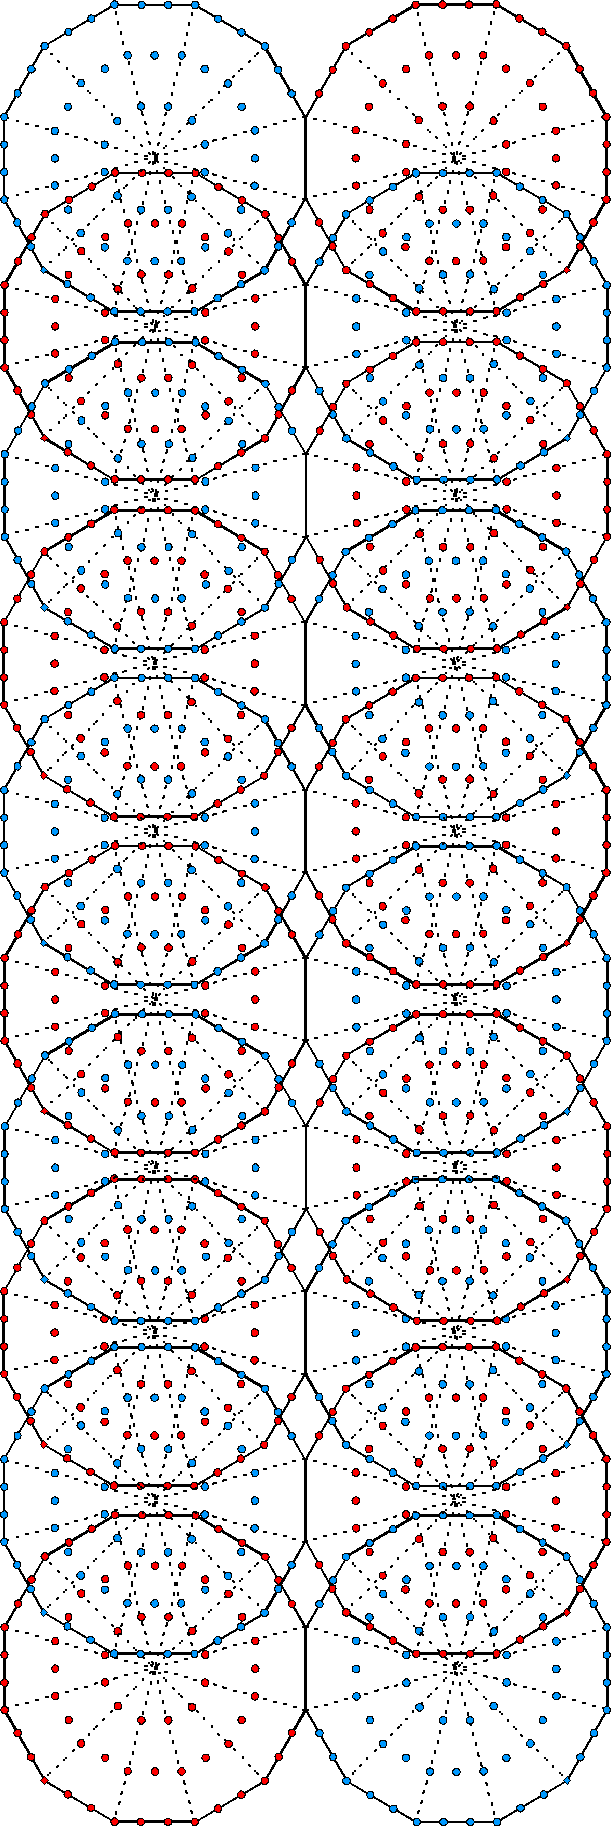 (680+680) yods outside root edge surround centres of dodecagons in 10-tree